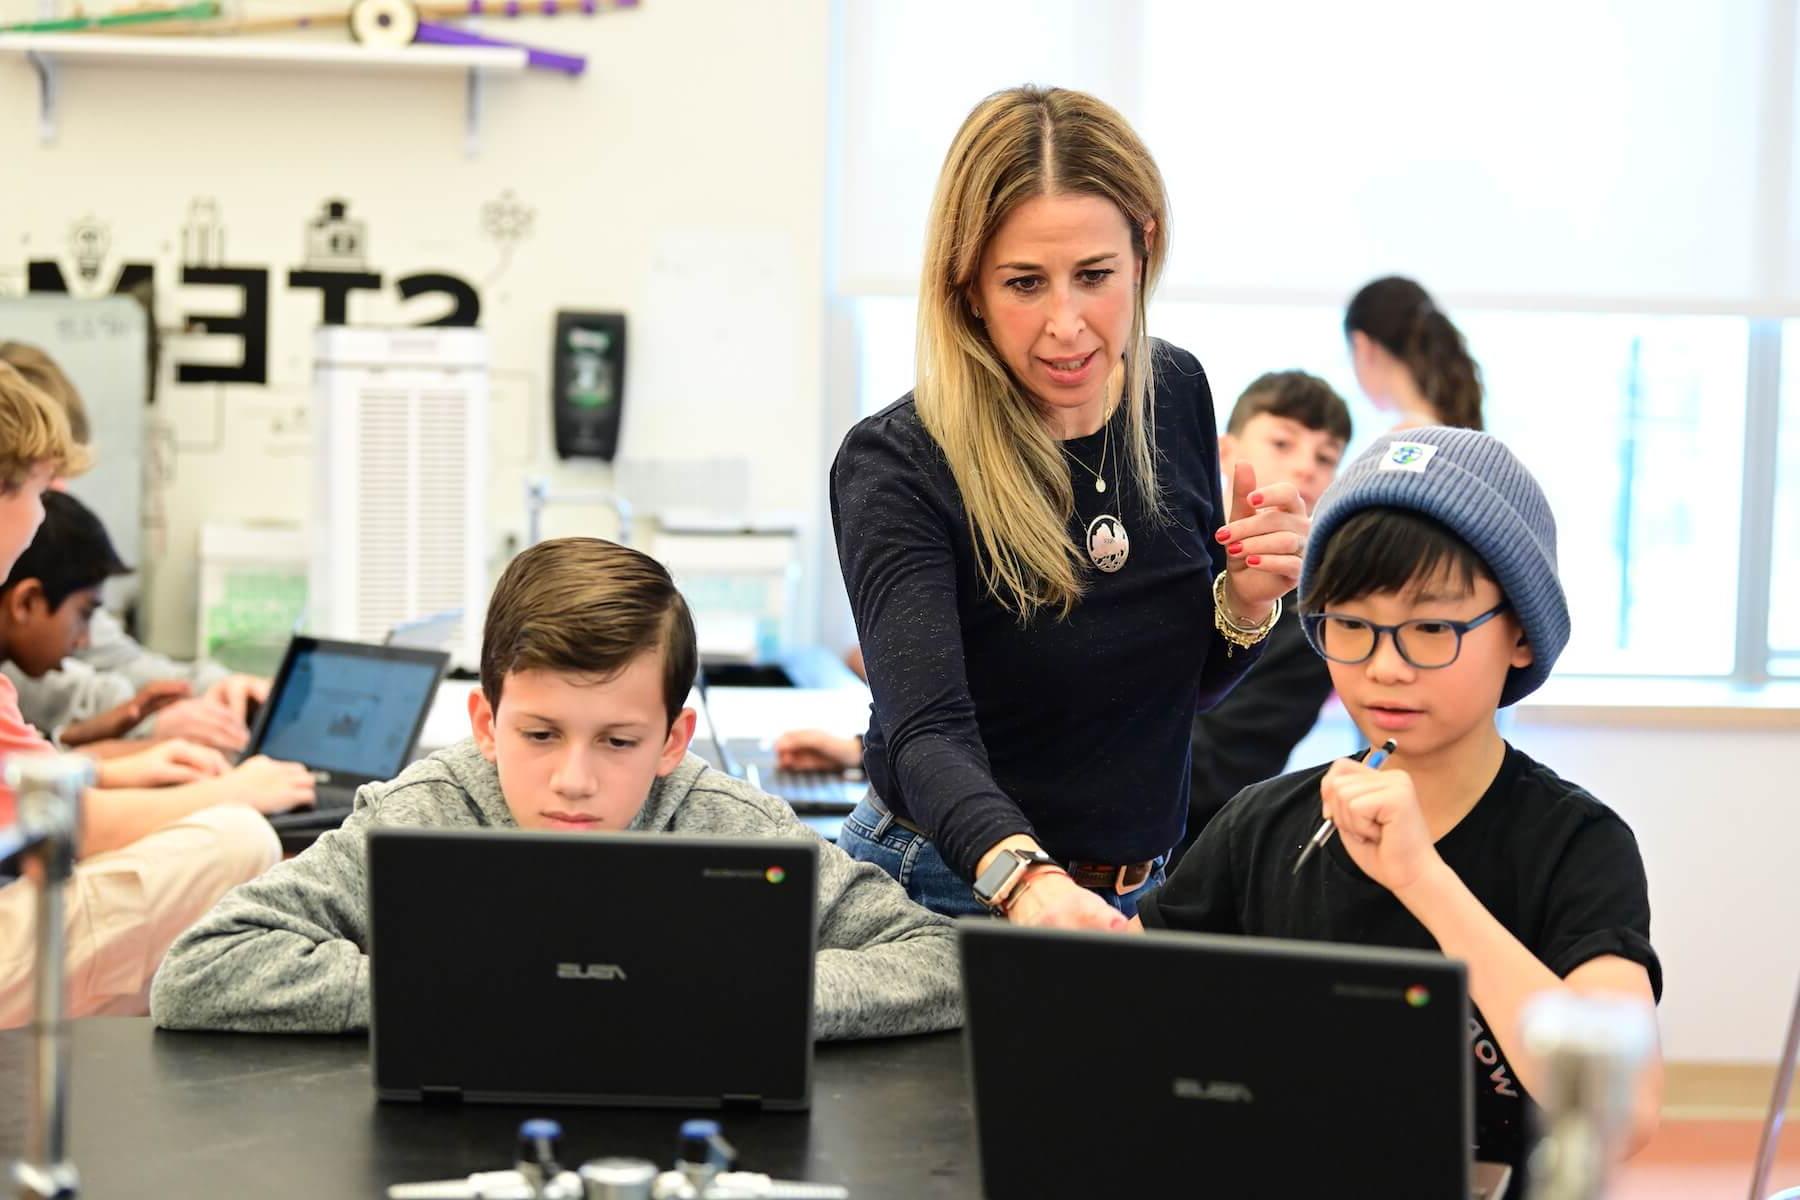 Ethical Culture Fieldston School Middle School students looking at computer with Teacher looking over shoulder to help